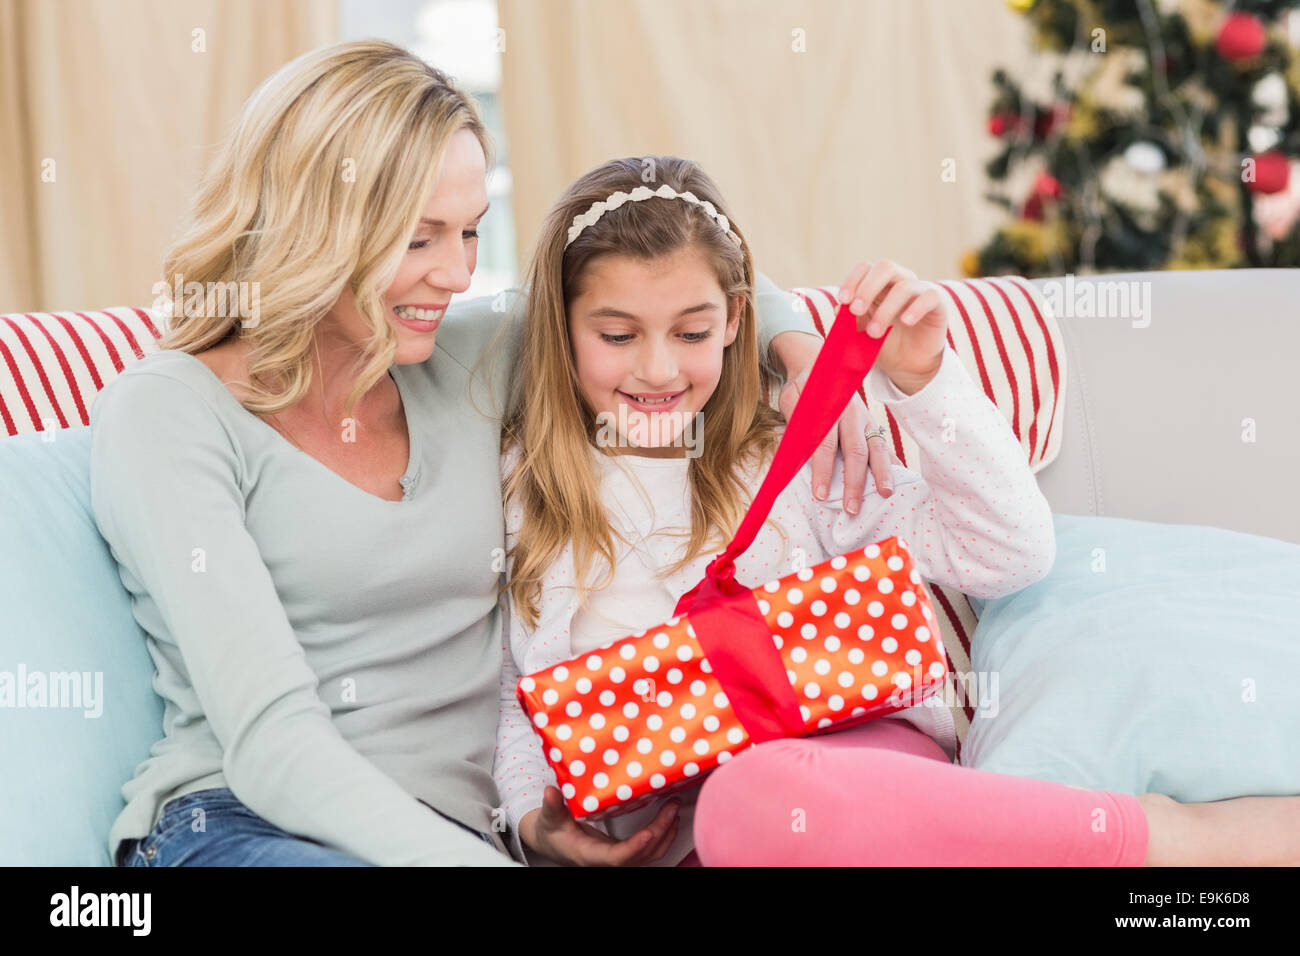 https://c8.alamy.com/comp/E9K6D8/cute-little-girl-sitting-on-couch-opening-gift-with-mum-E9K6D8.jpg